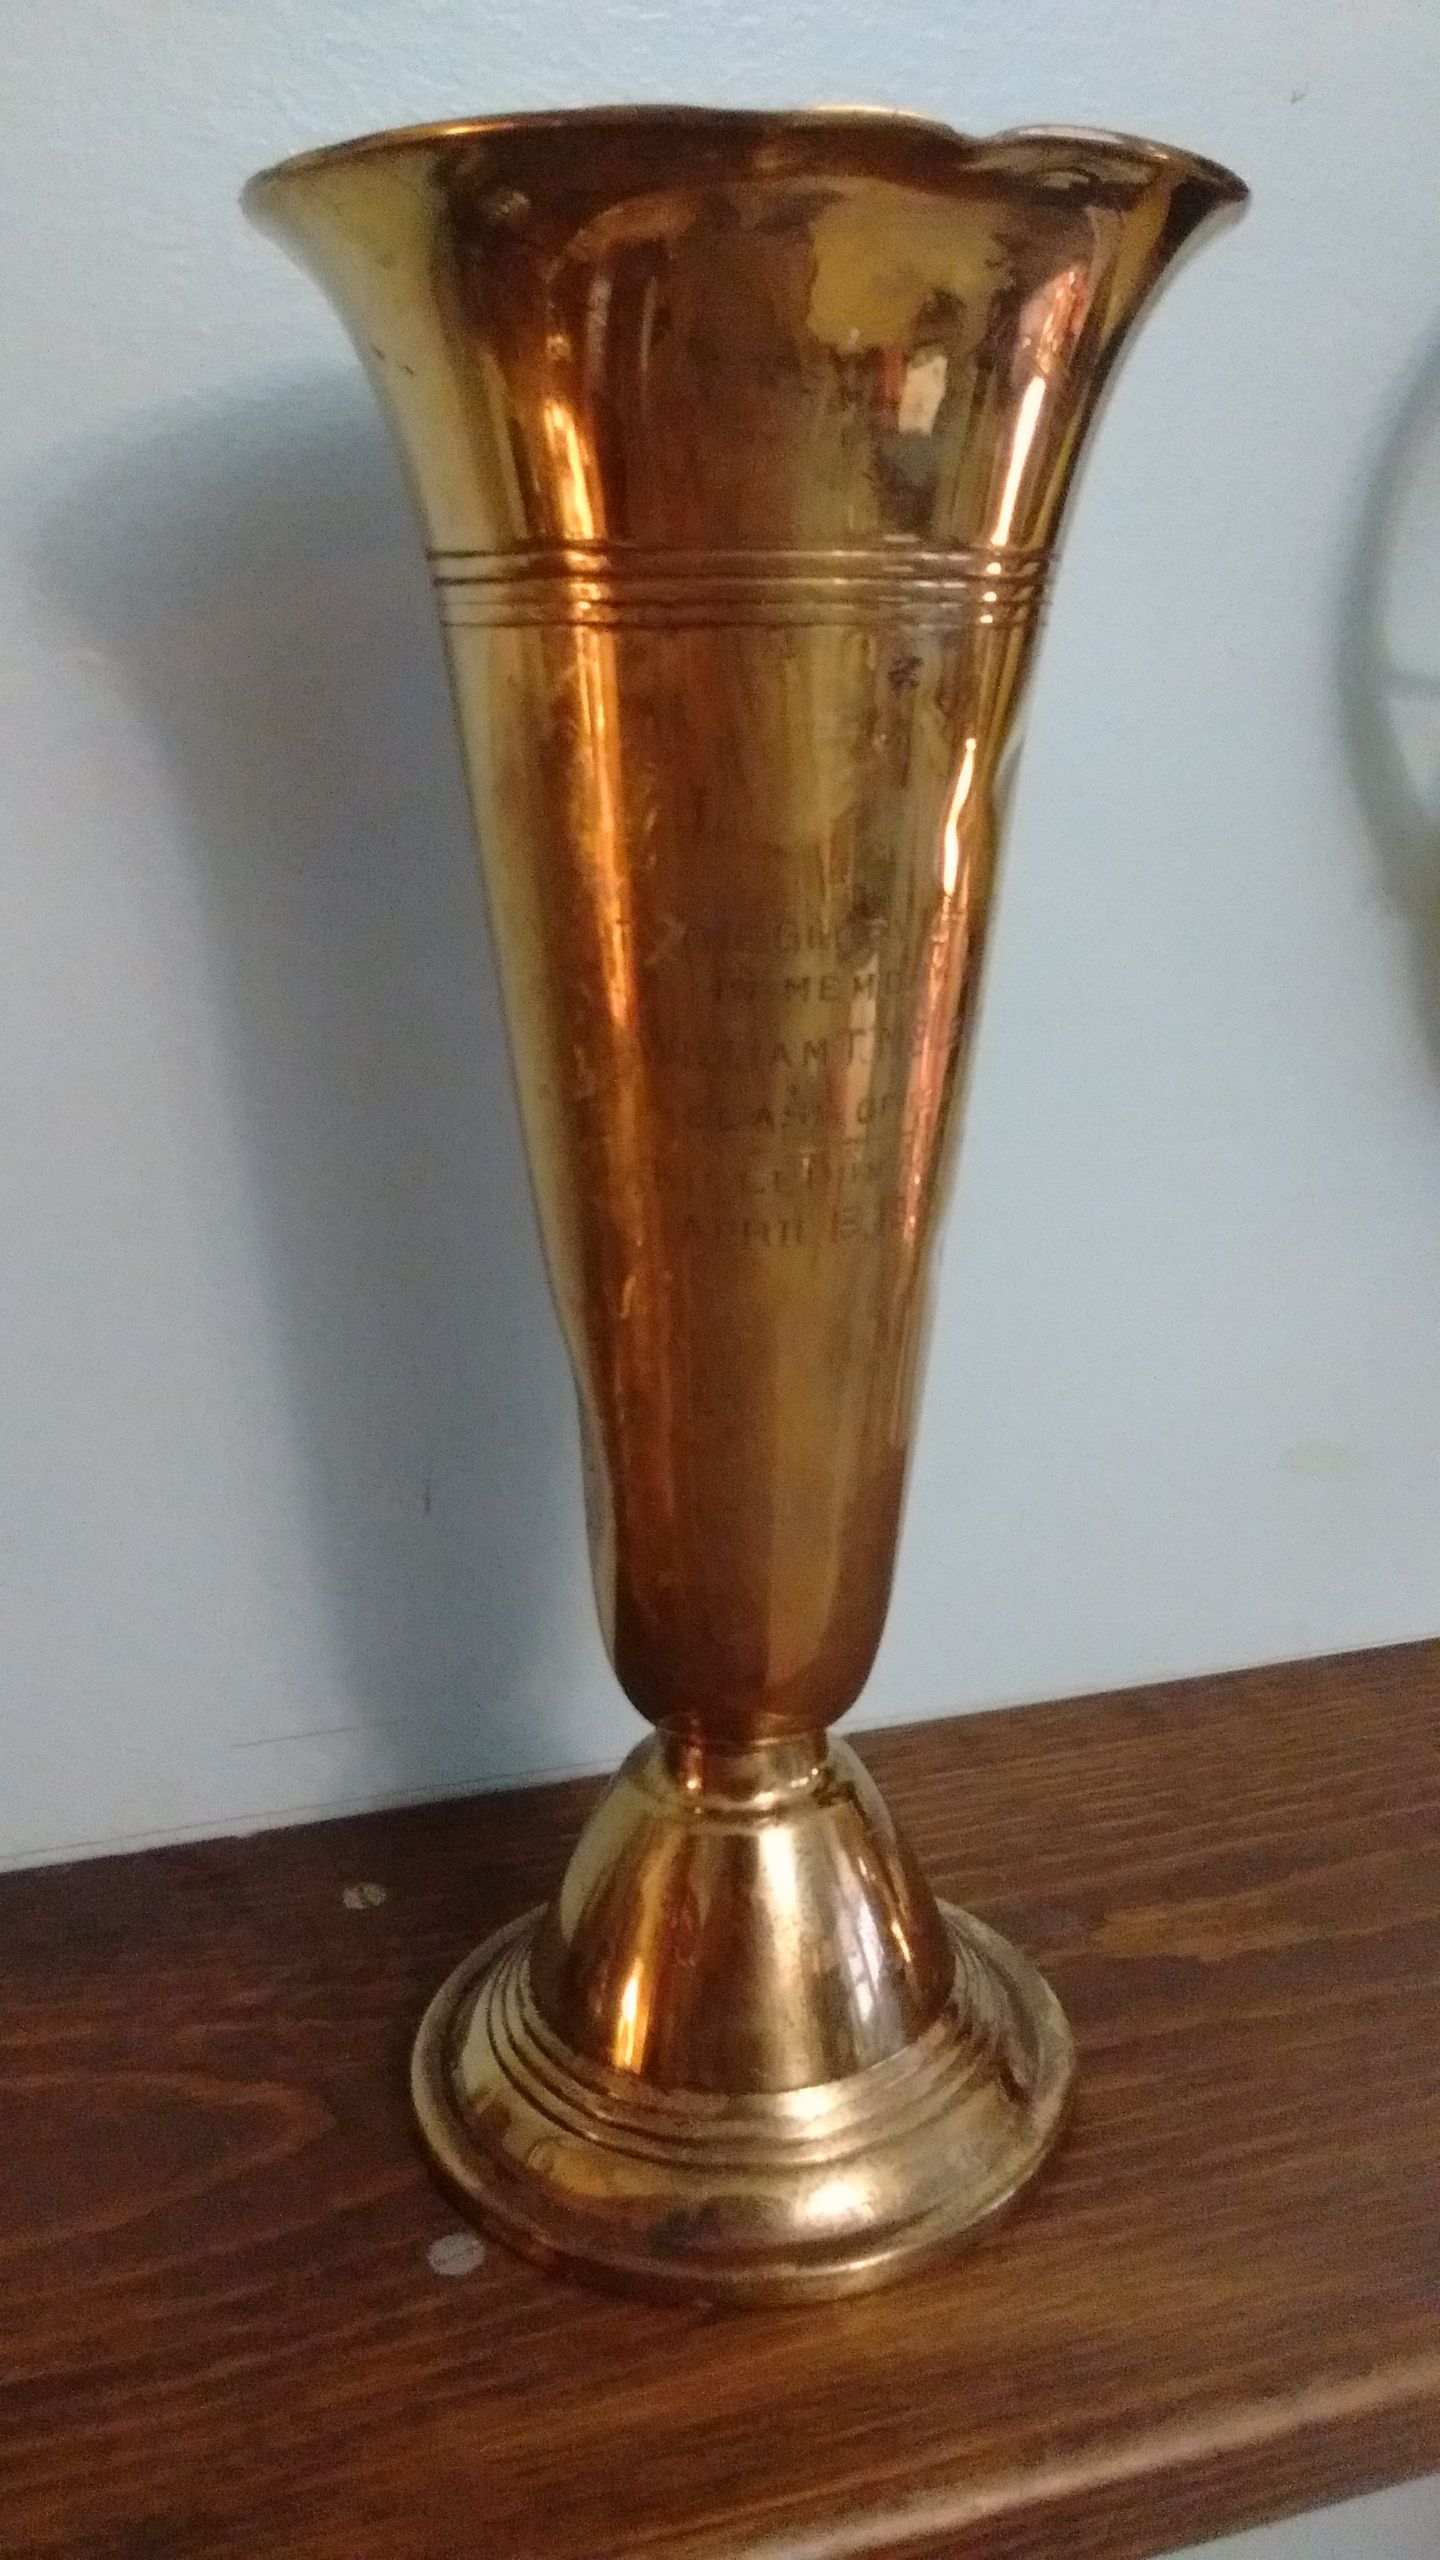 (Dump Find) PFC William T. McLeod was killed in action in Germany during the start of the Battle of Halle on April 13th 1945. This brass vase was like